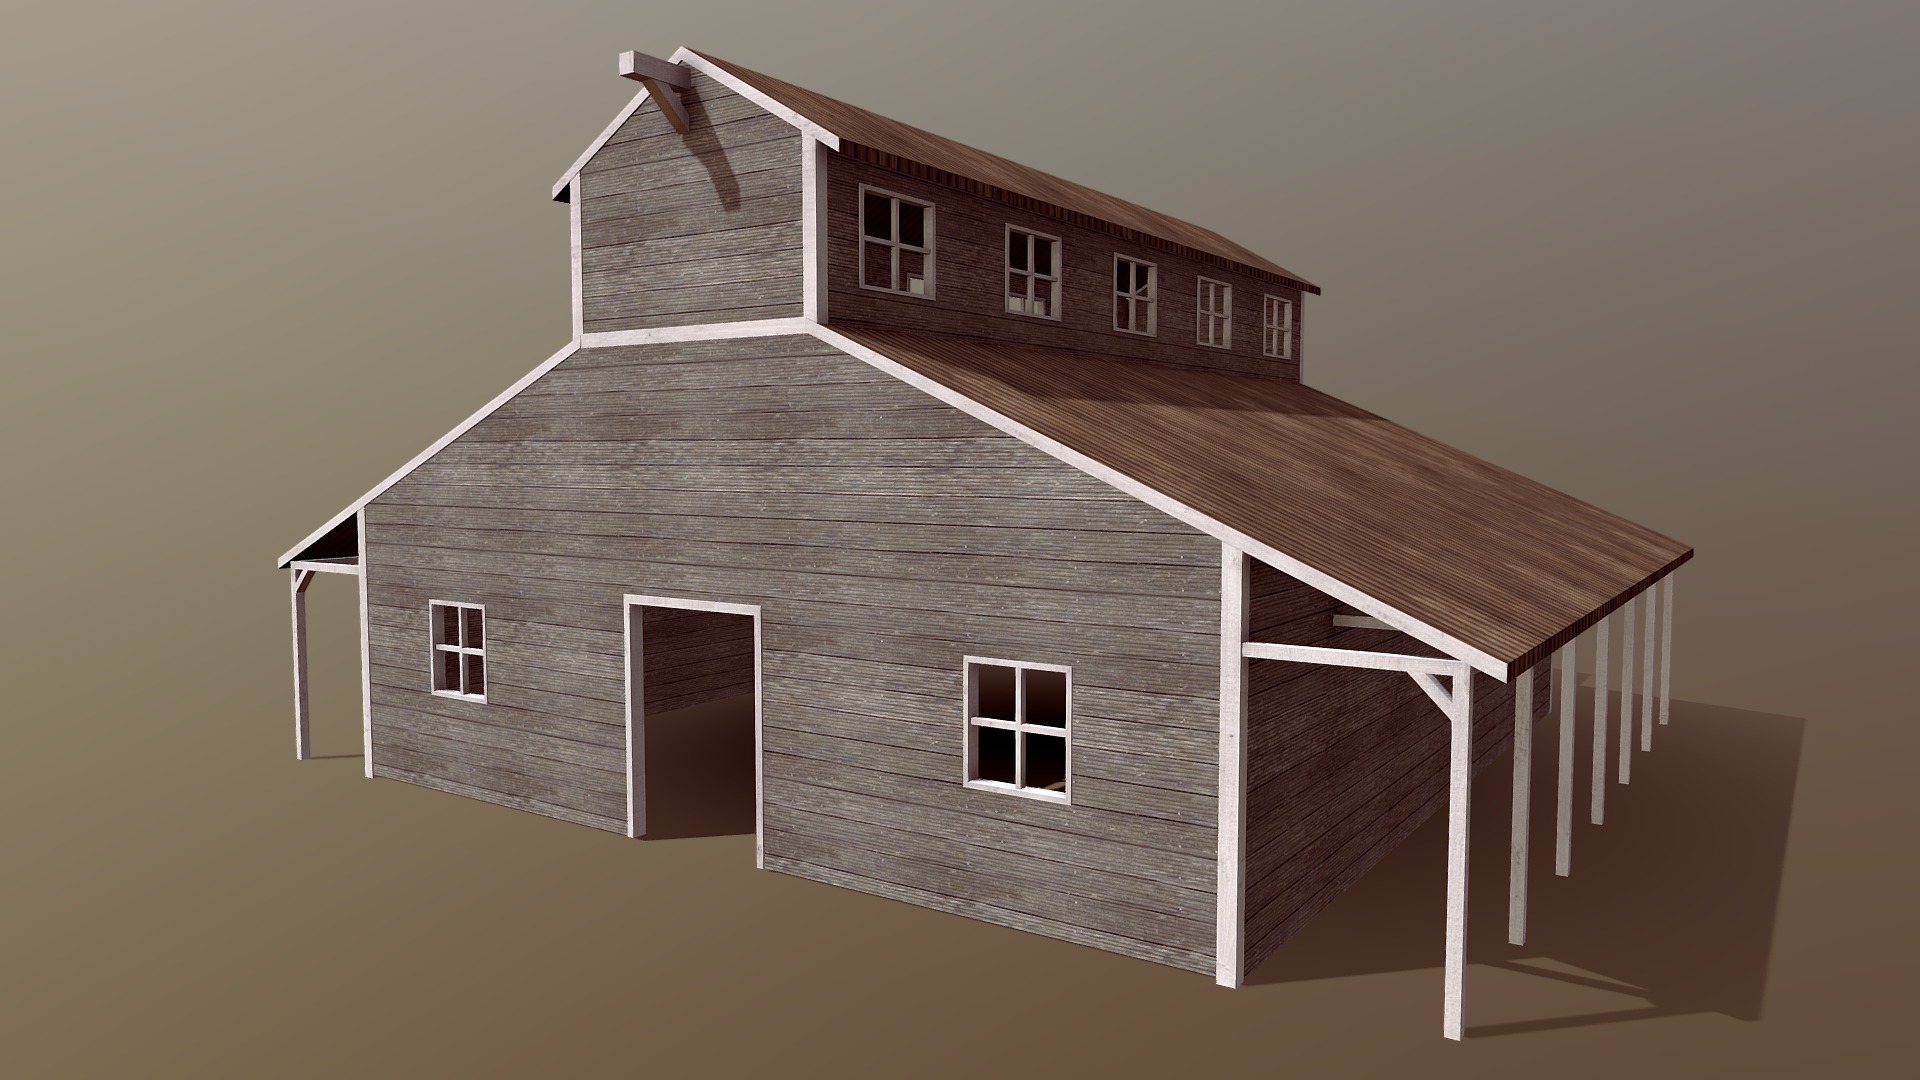 A 20th century Western era Stables. Works great in any modern game engines or for rendering purposes. The model comes with two texture and material setups. Both the interior and exterior are textured.

Available in: blend, fbx, dae, obj, mtl and UnityPackage.

Textures are in 4096x4096 PNG format:




Diffuse/Albedo Texture

Normal Map

Ambient Occlusion

Unity Package includes easy to use drag and drop prefabs.

Materials are Native to Blender 2.79 (Packed textures) ,Files types have been exported from Blender

For any help or inquiries please message me directly on Sketchfab or on my email: howardcoates95@gmail.com - Stables - Buy Royalty Free 3D model by HowardCoates 3d model